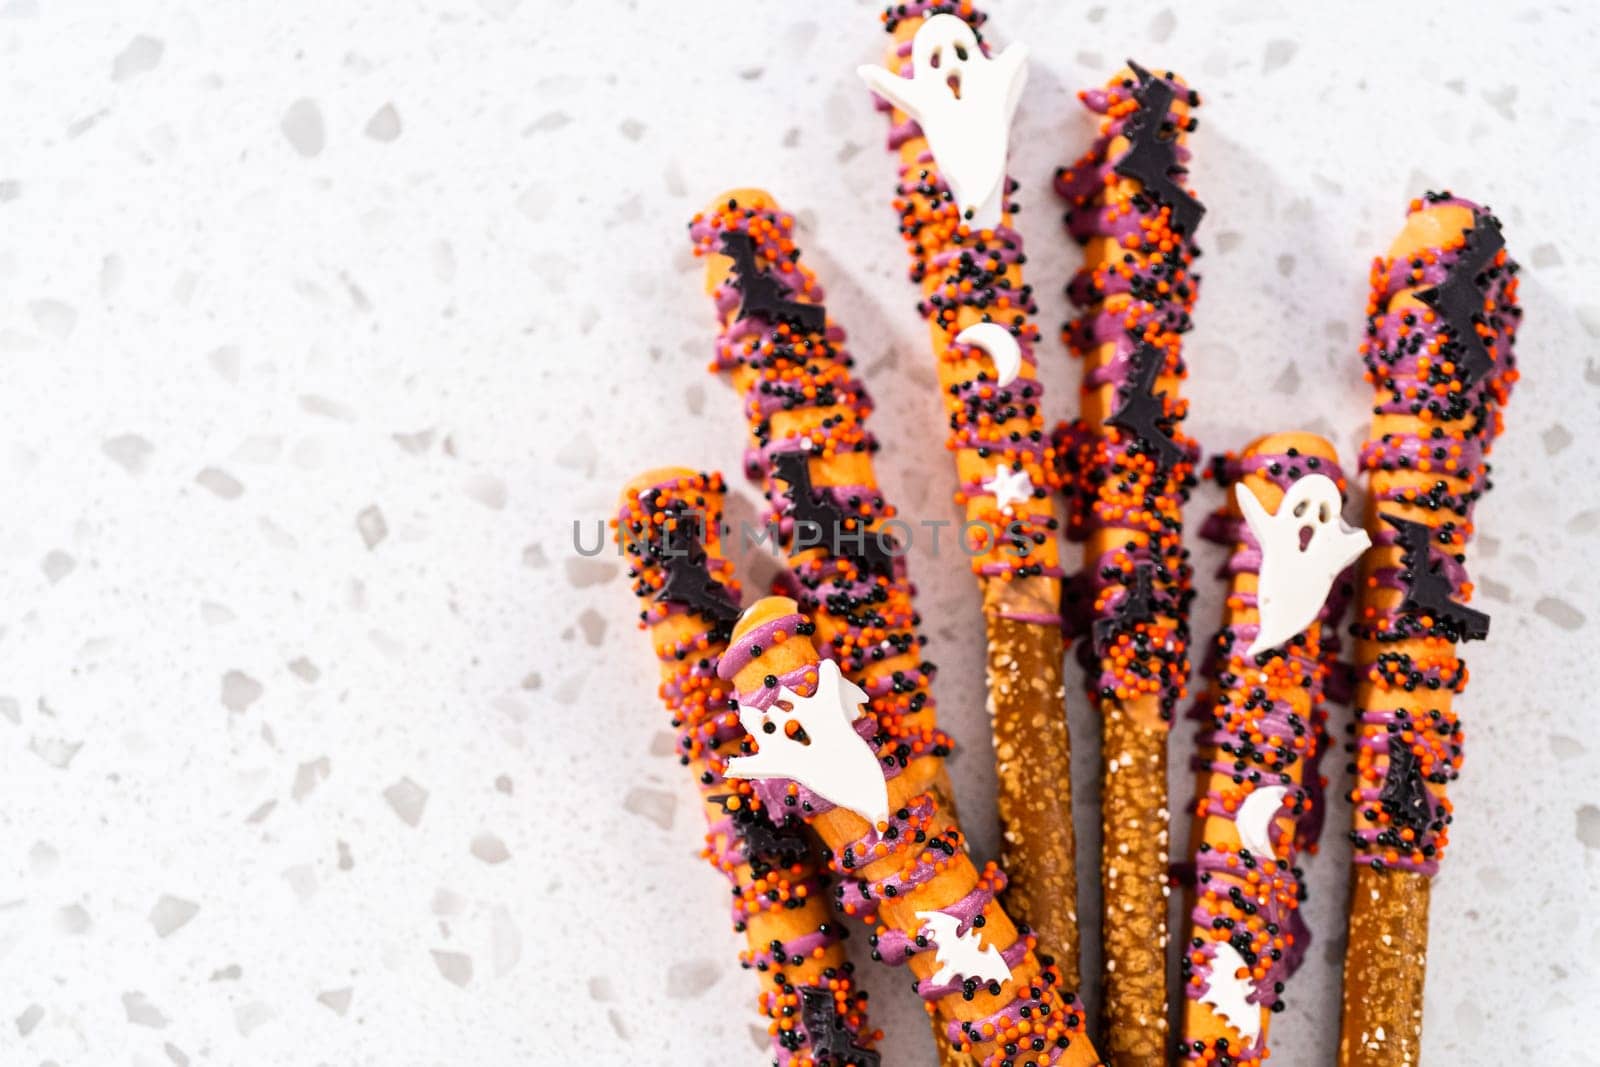 Flat lay. Halloween chocolate-covered pretzel rods with sprinkles on a kitchen counter.